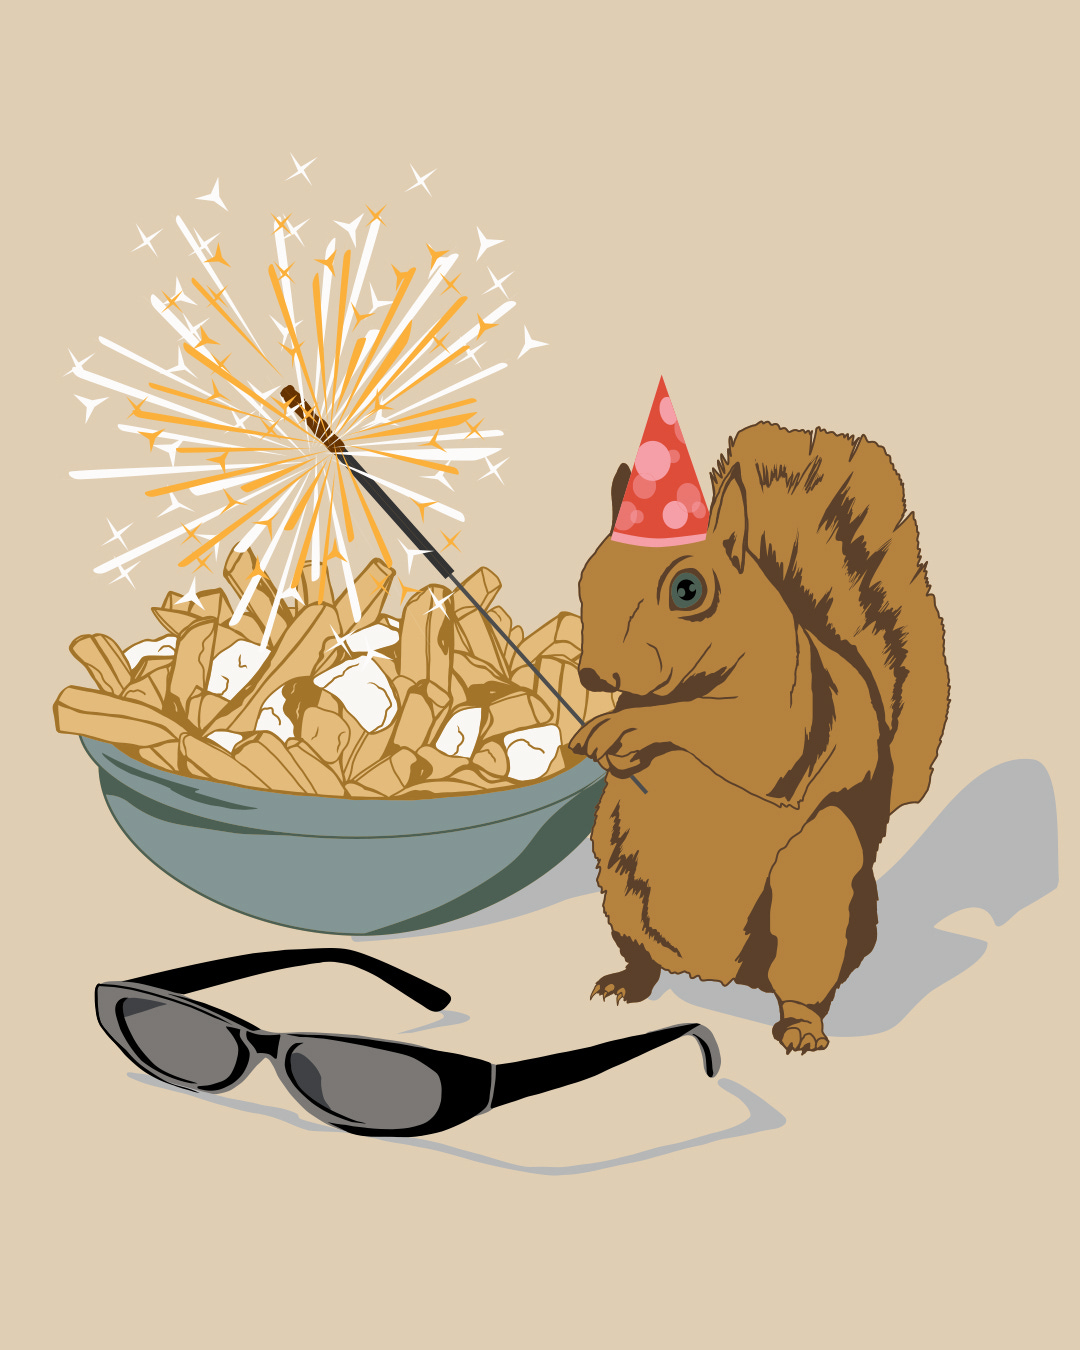 Illustration by Montreal artist La Pimbêche of a squirrel wearing a birthday hat and holding a sparkler, black sunglasses and a bowl of poutine